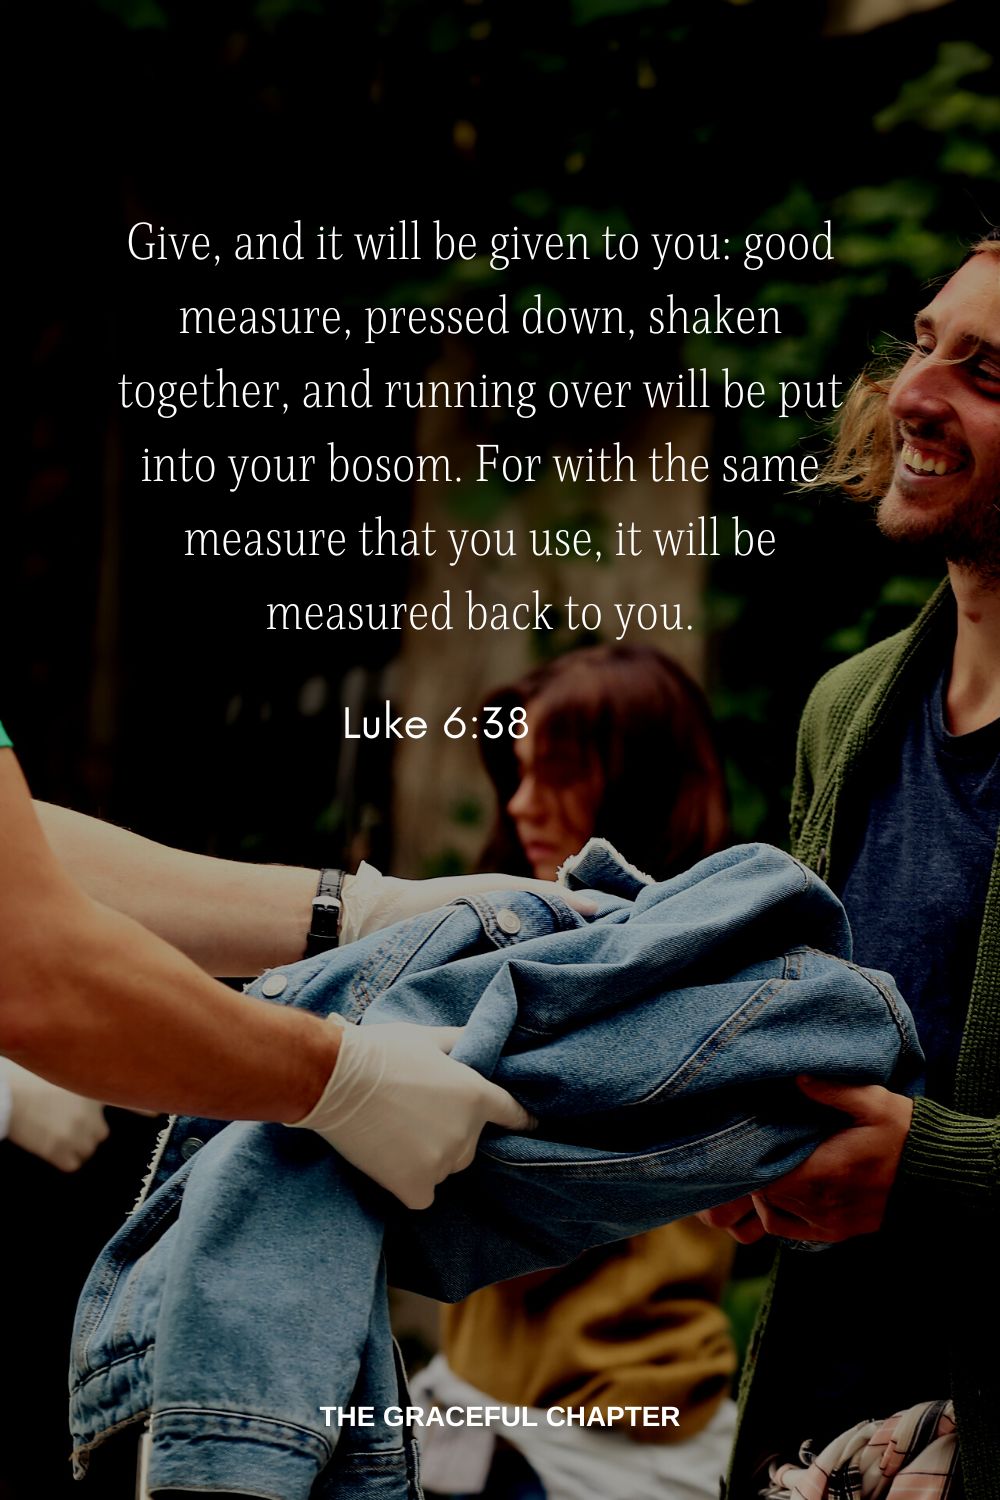 Give, and it will be given to you: good measure, pressed down, shaken together, and running over will be put into your bosom. For with the same measure that you use, it will be measured back to you. Luke 6:38